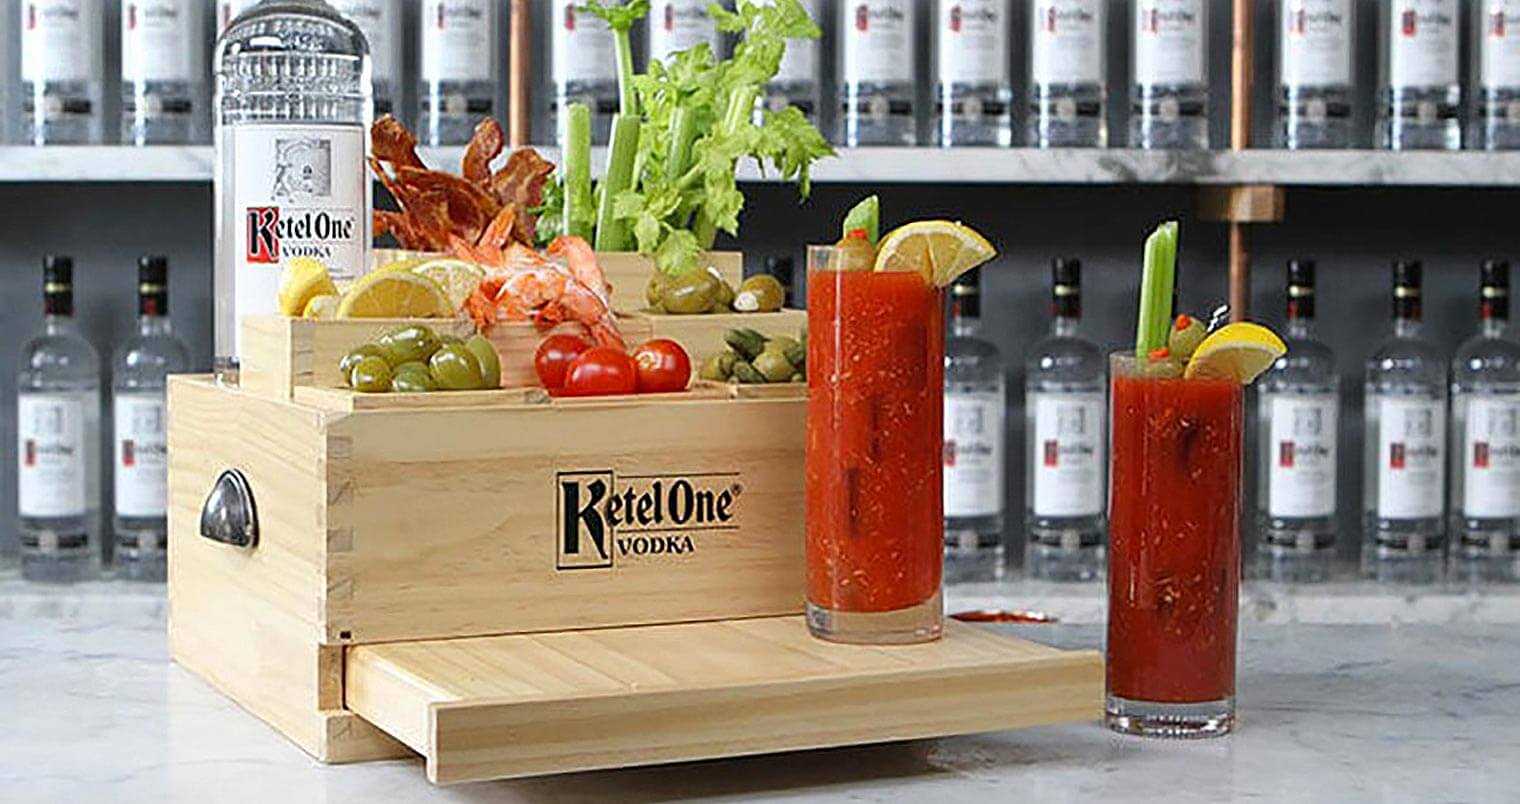 Celebrate National Bloody Mary Day with Ketel One Vodka, featured image